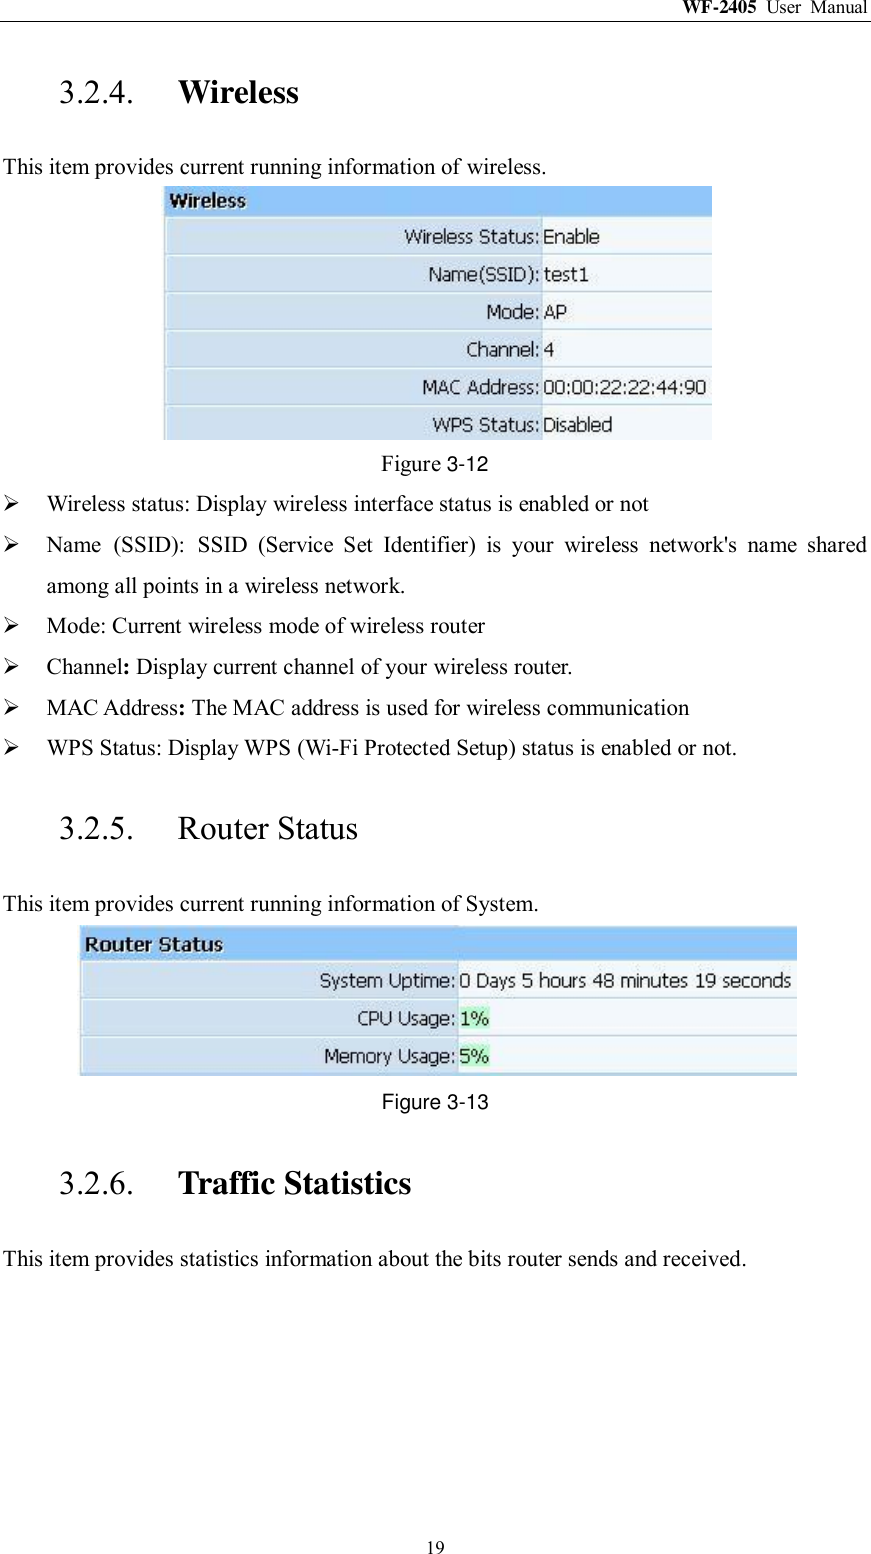 WF-2405  User  Manual  19 3.2.4. Wireless This item provides current running information of wireless.  Figure 3-12  Wireless status: Display wireless interface status is enabled or not  Name  (SSID):  SSID  (Service  Set  Identifier)  is  your  wireless  network&apos;s  name  shared among all points in a wireless network.  Mode: Current wireless mode of wireless router    Channel: Display current channel of your wireless router.  MAC Address: The MAC address is used for wireless communication  WPS Status: Display WPS (Wi-Fi Protected Setup) status is enabled or not. 3.2.5. Router Status This item provides current running information of System.  Figure 3-13 3.2.6. Traffic Statistics This item provides statistics information about the bits router sends and received. 